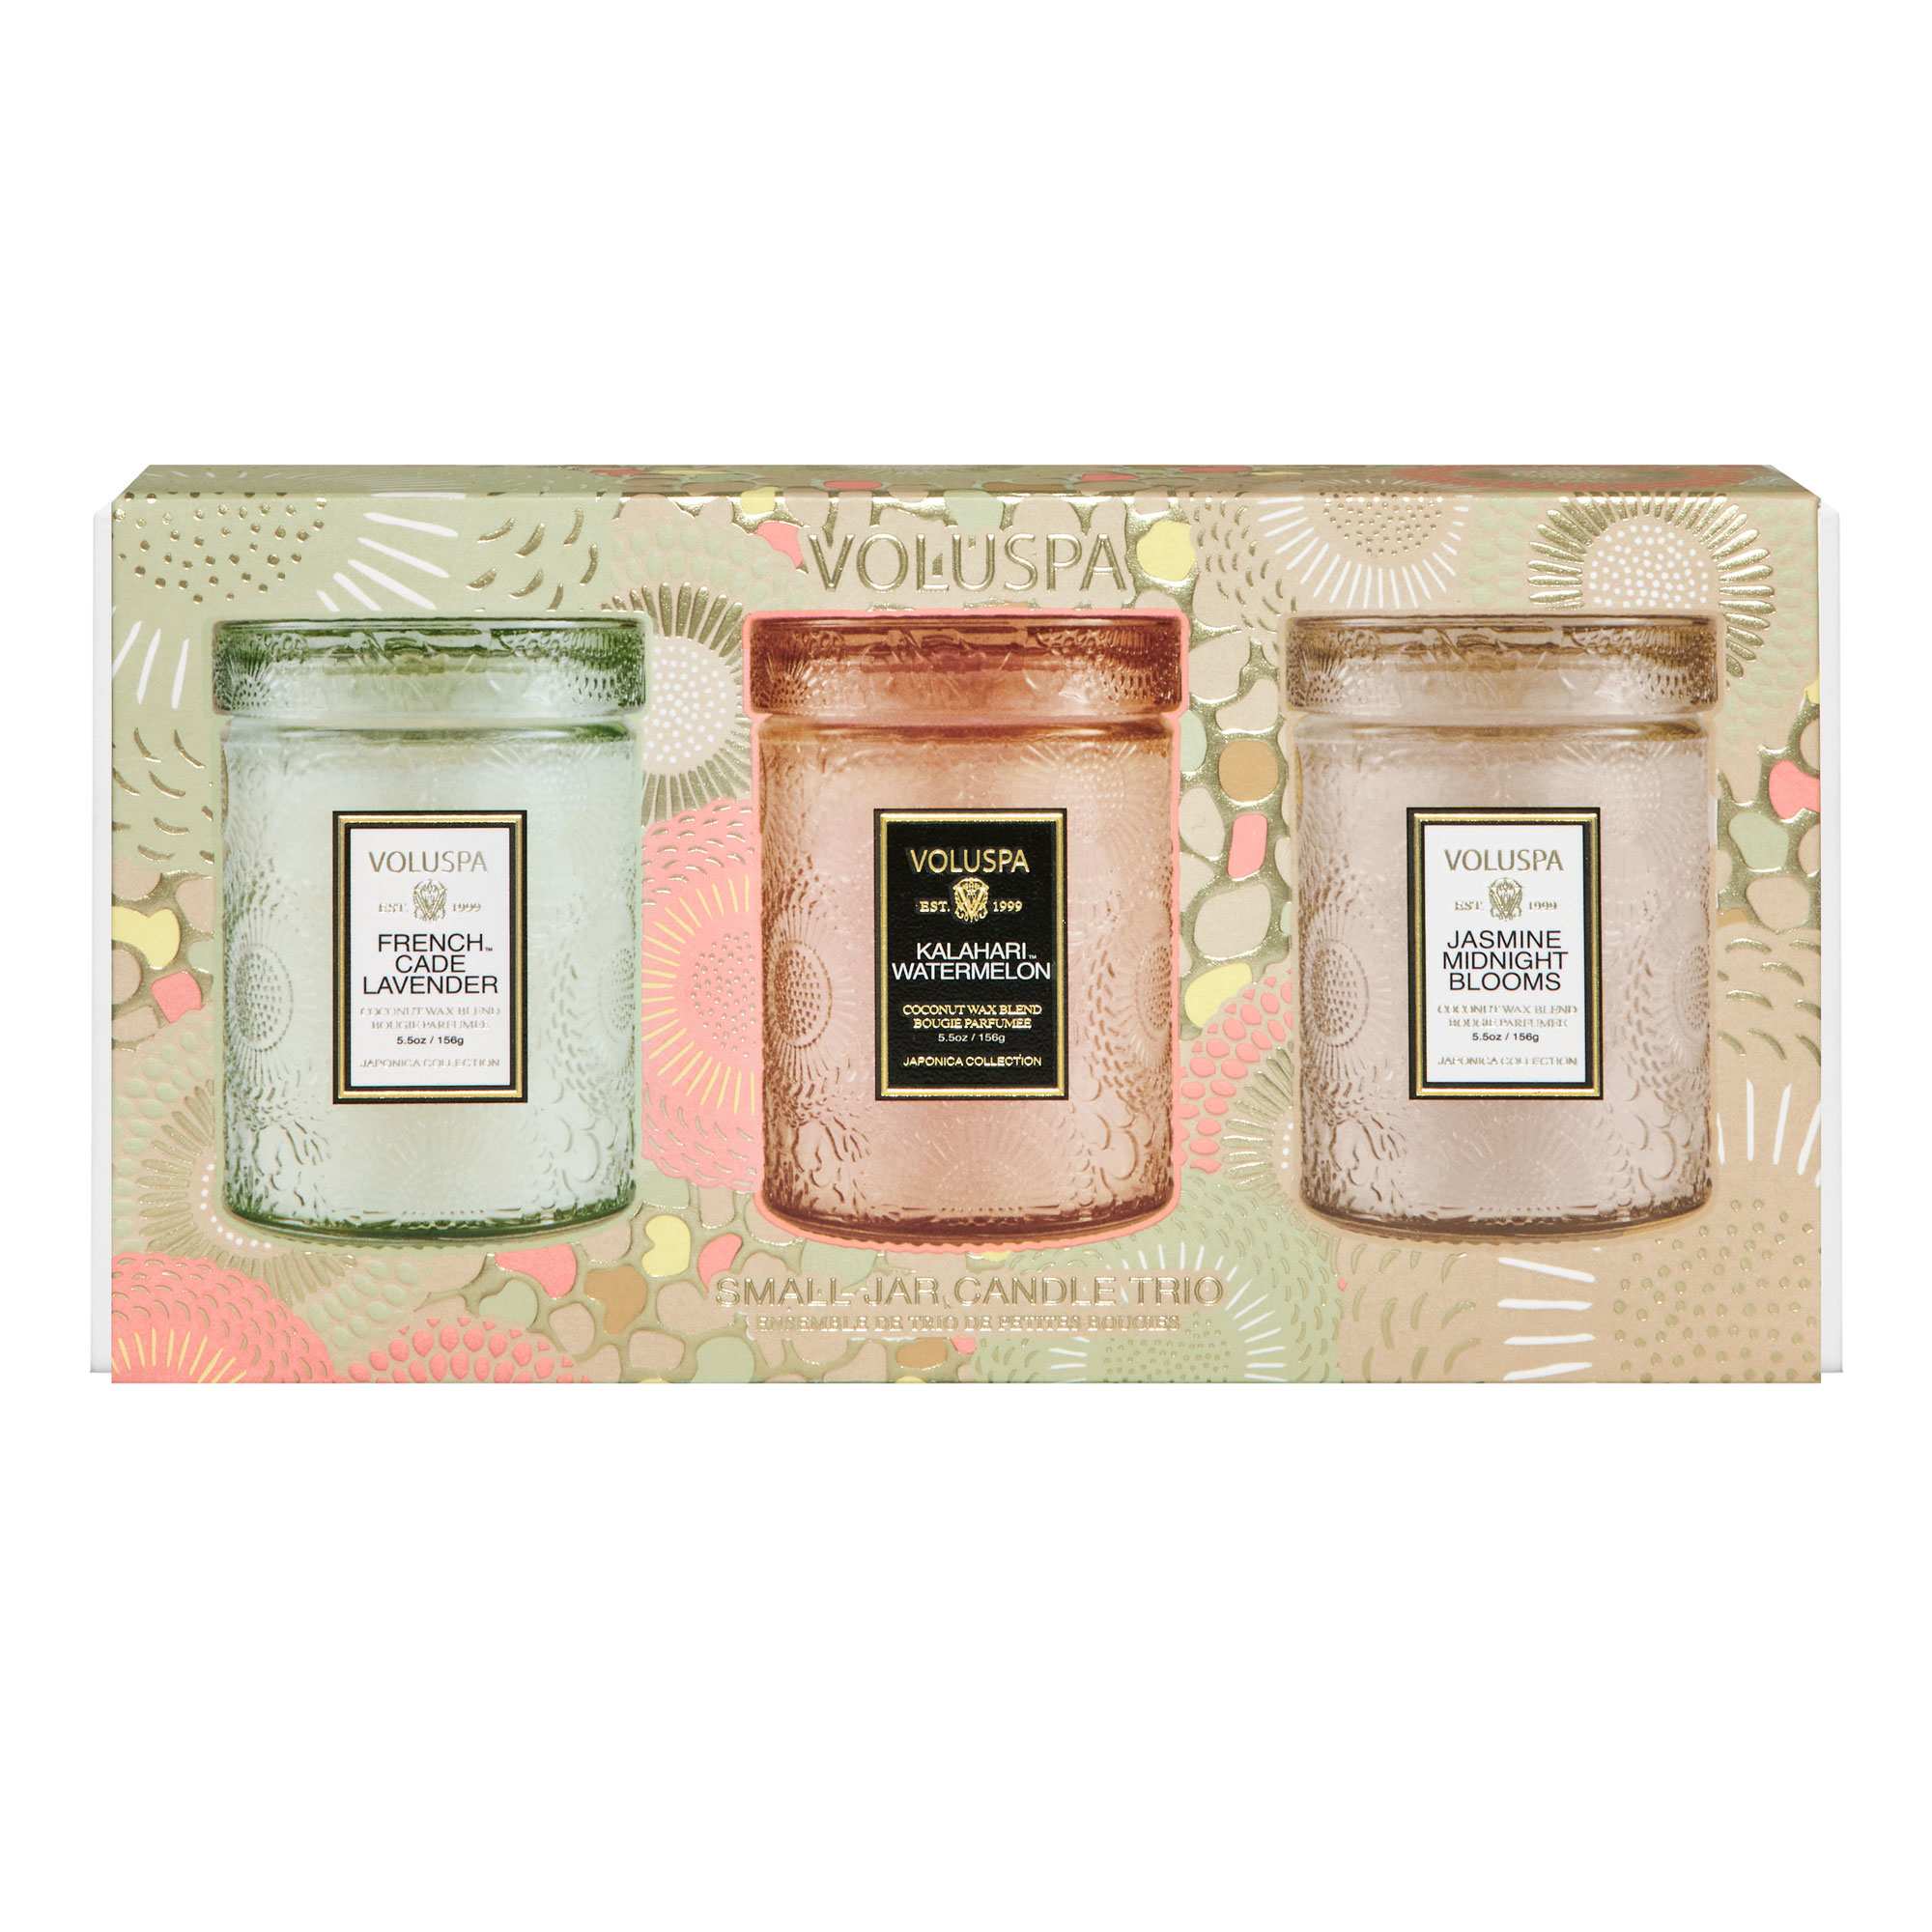 Voluspa - Spring Small Jar Candle Trio  - Gift set includes French Cade Lavender, Kalahari Watermelon, and Jasmine Midnight Blooms.